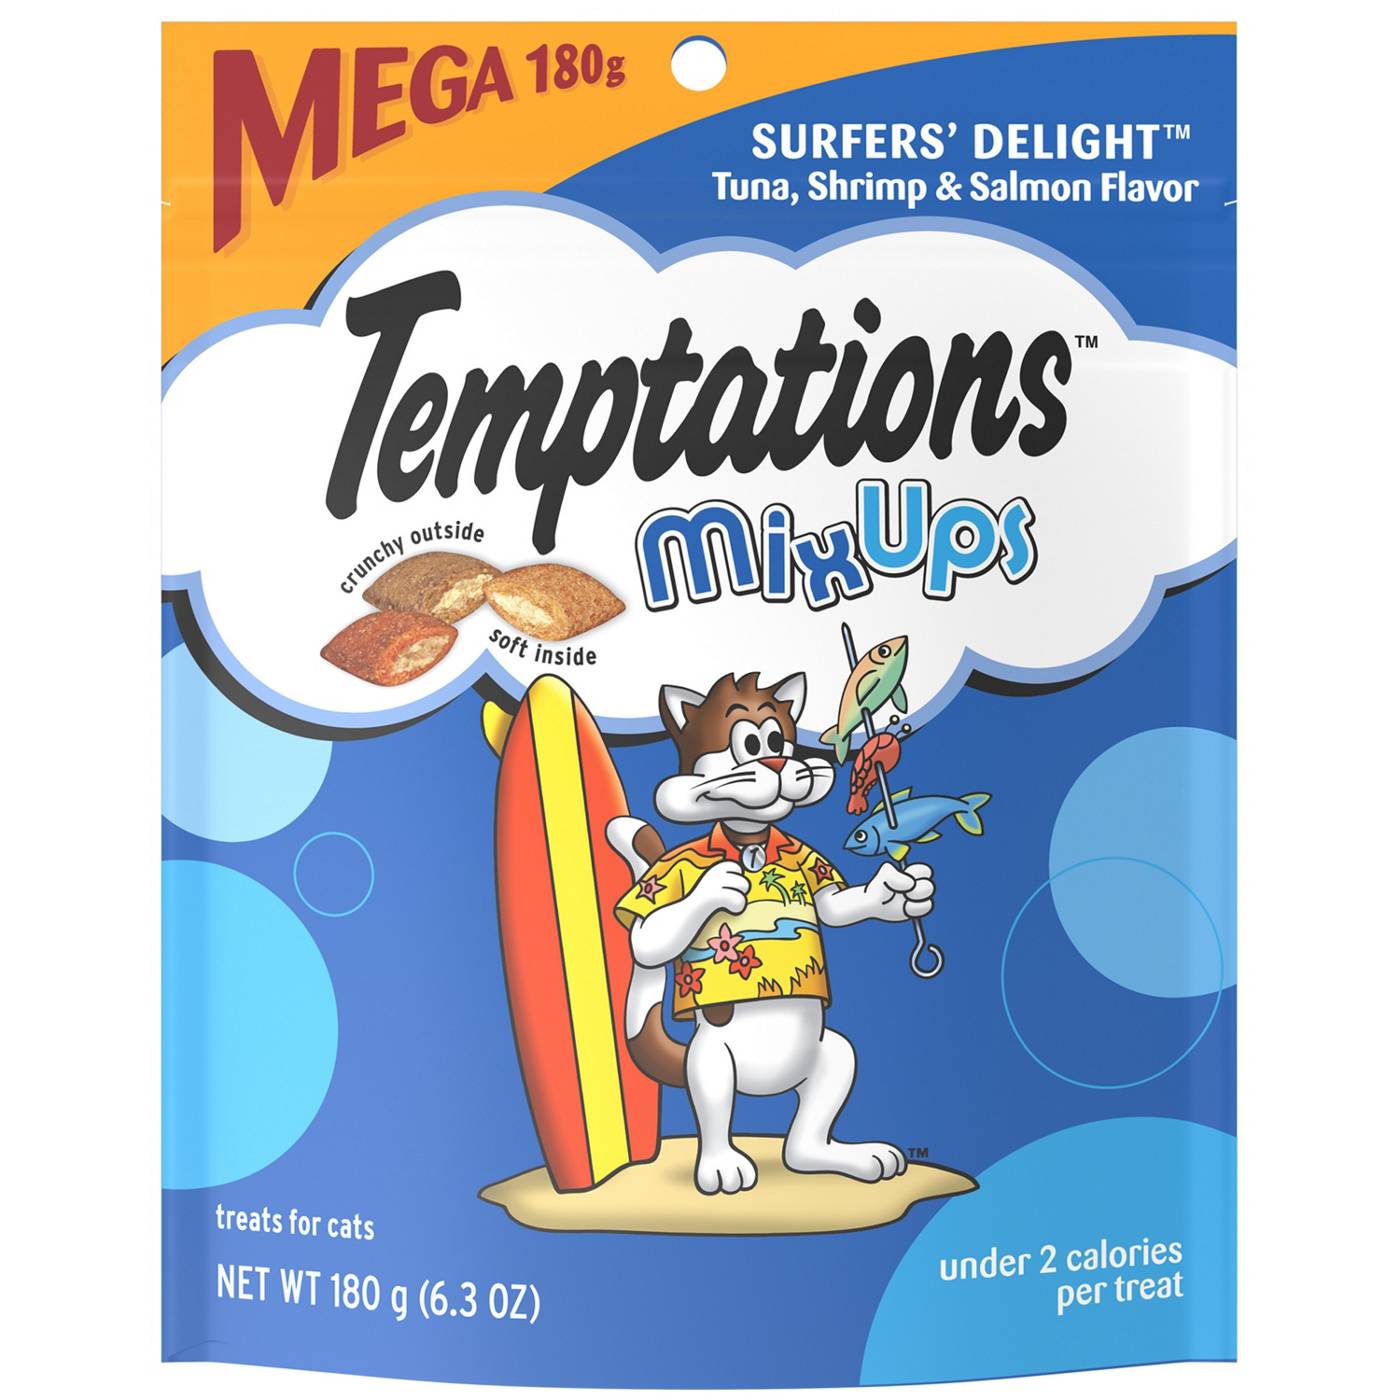 Temptations MixUps Crunchy and Soft Cat Treats Surfer's Delight Flavor; image 1 of 5